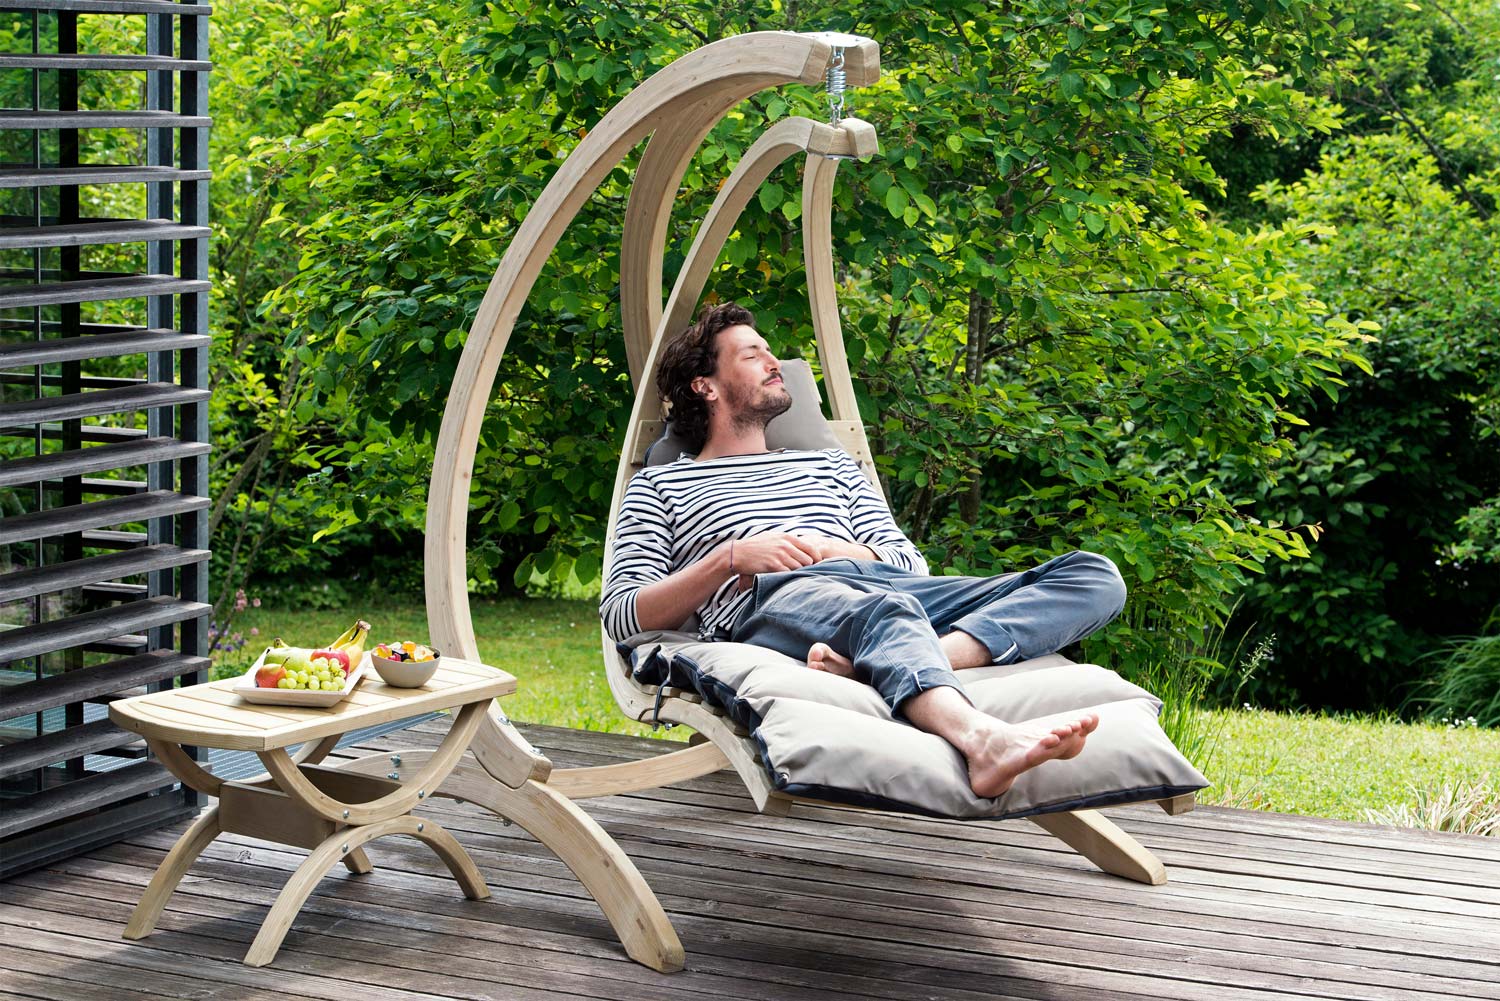 Garden furniture tips & tricks - how to care for Globo & Co properly